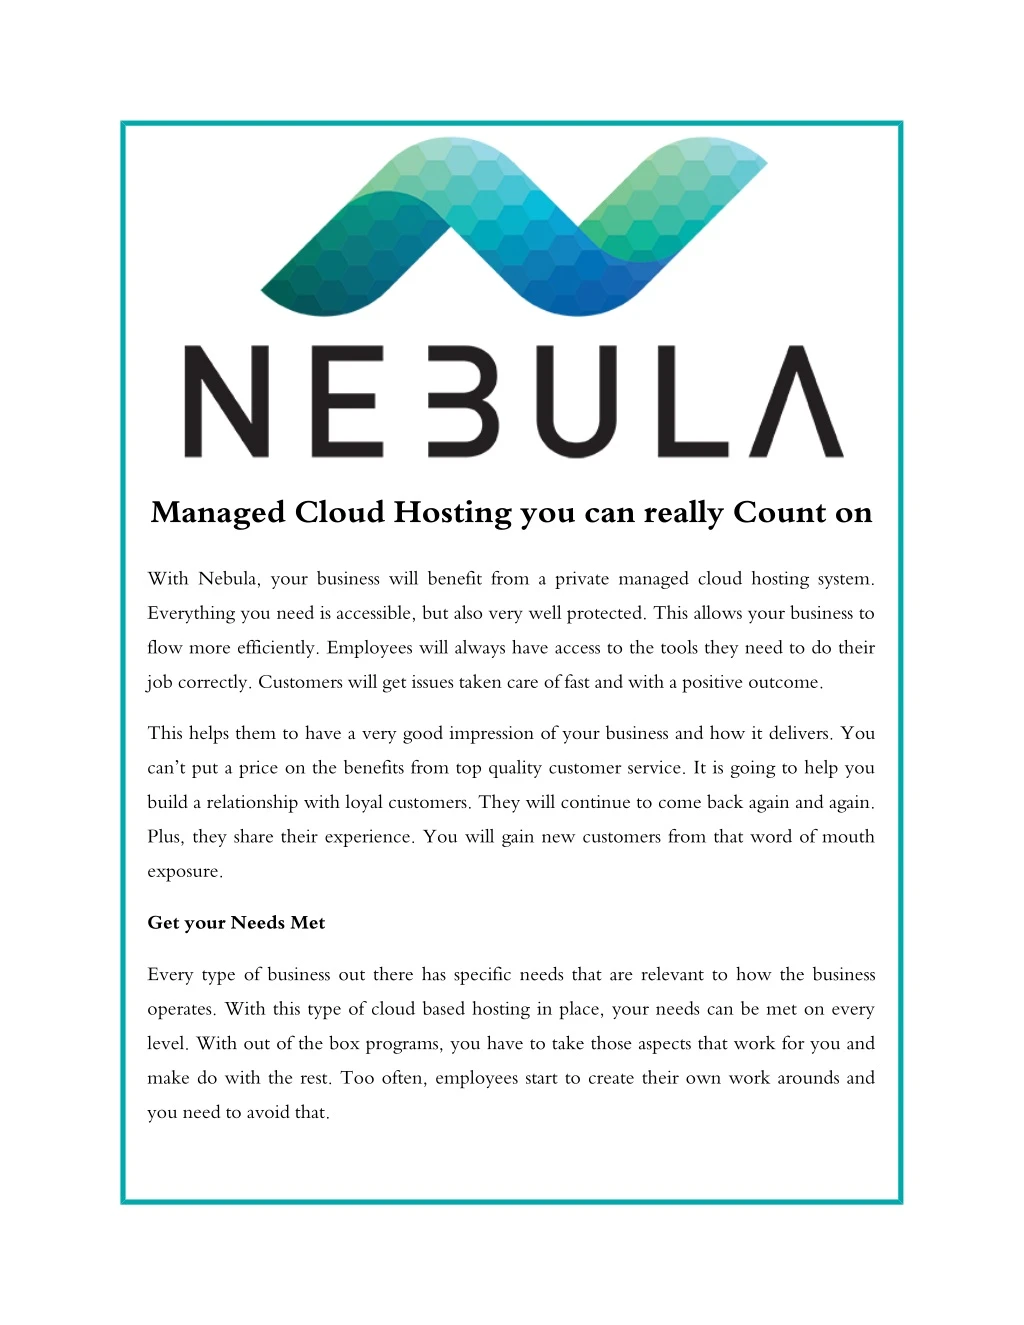 managed cloud hosting you can really count on